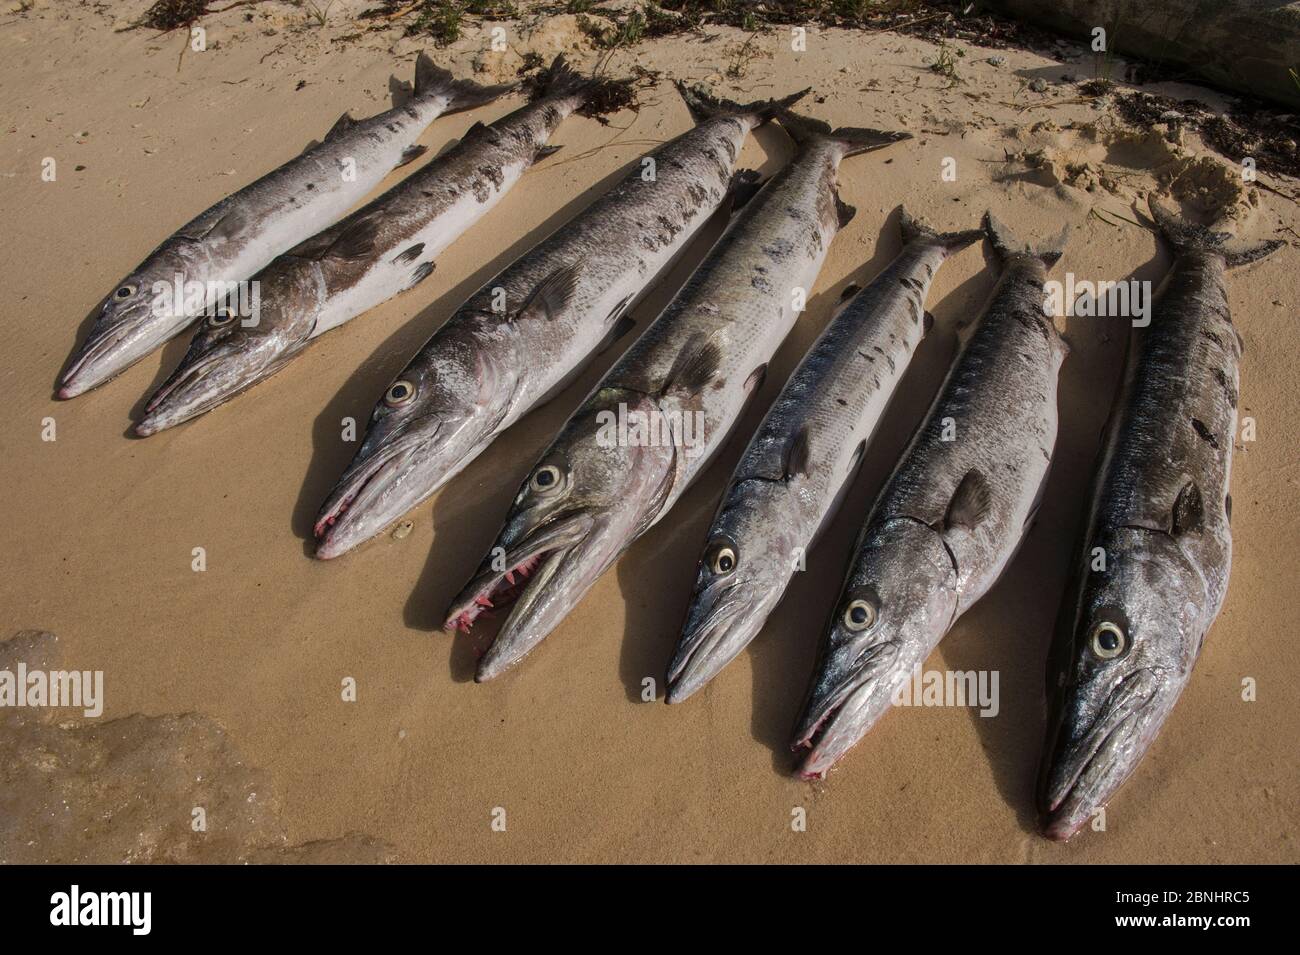 Great barracuda (Sphyraena barracuda) laid out on beach. Research MAR Alliance is performing population assessments on Sharks, Rays, and Great Barracu Stock Photo